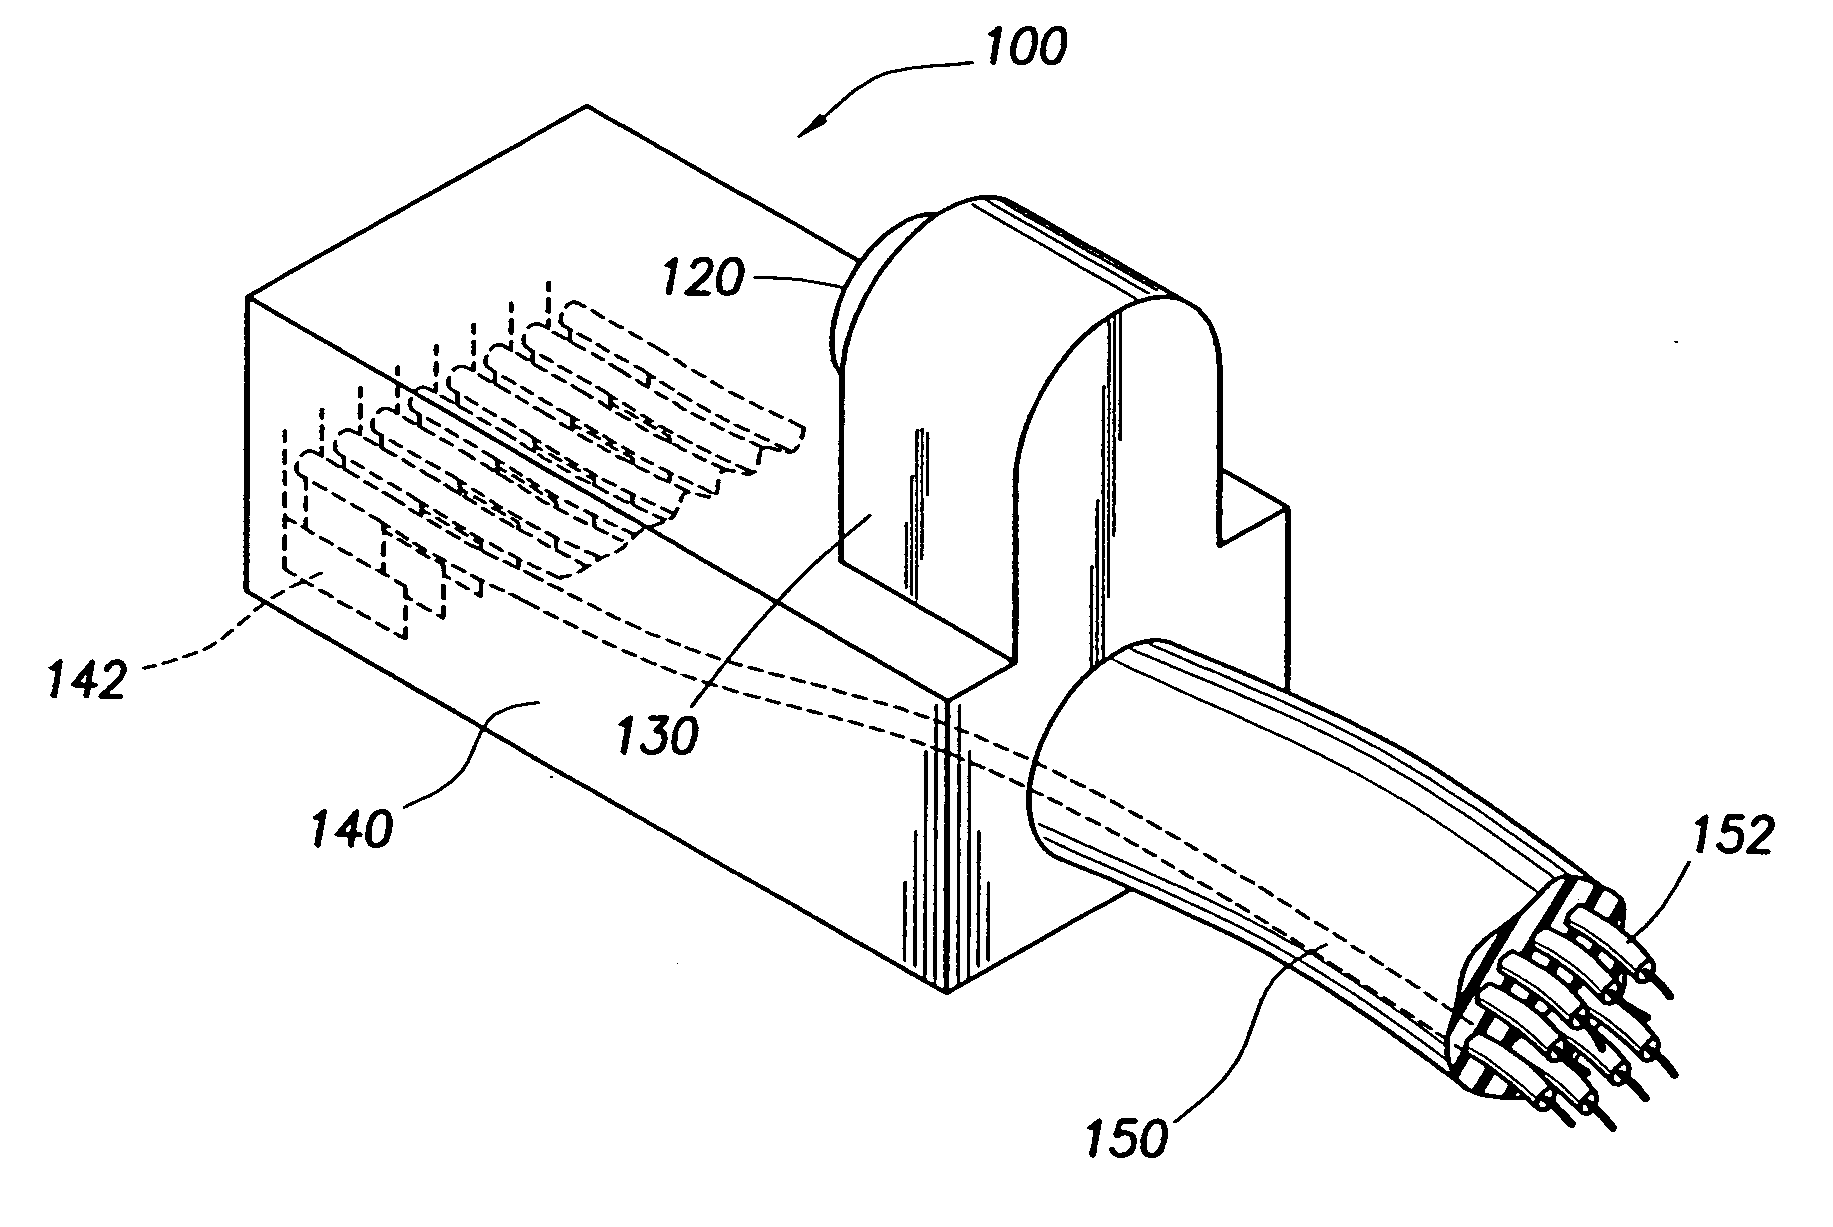 Method for transmitting data using a releasable connector